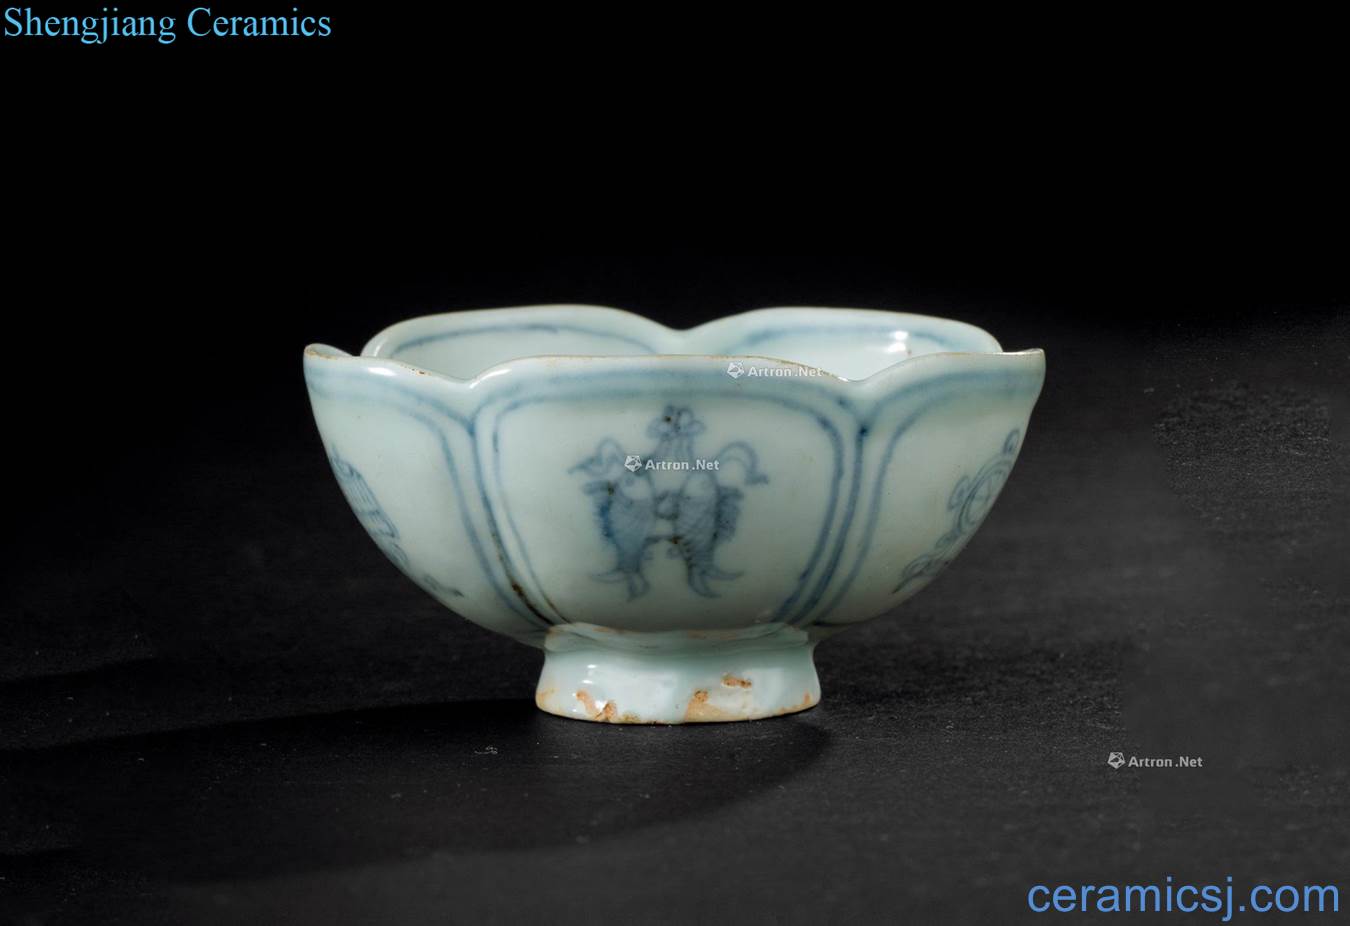 At the end of the yuan Ming Blue and white plum blossom shaped glass